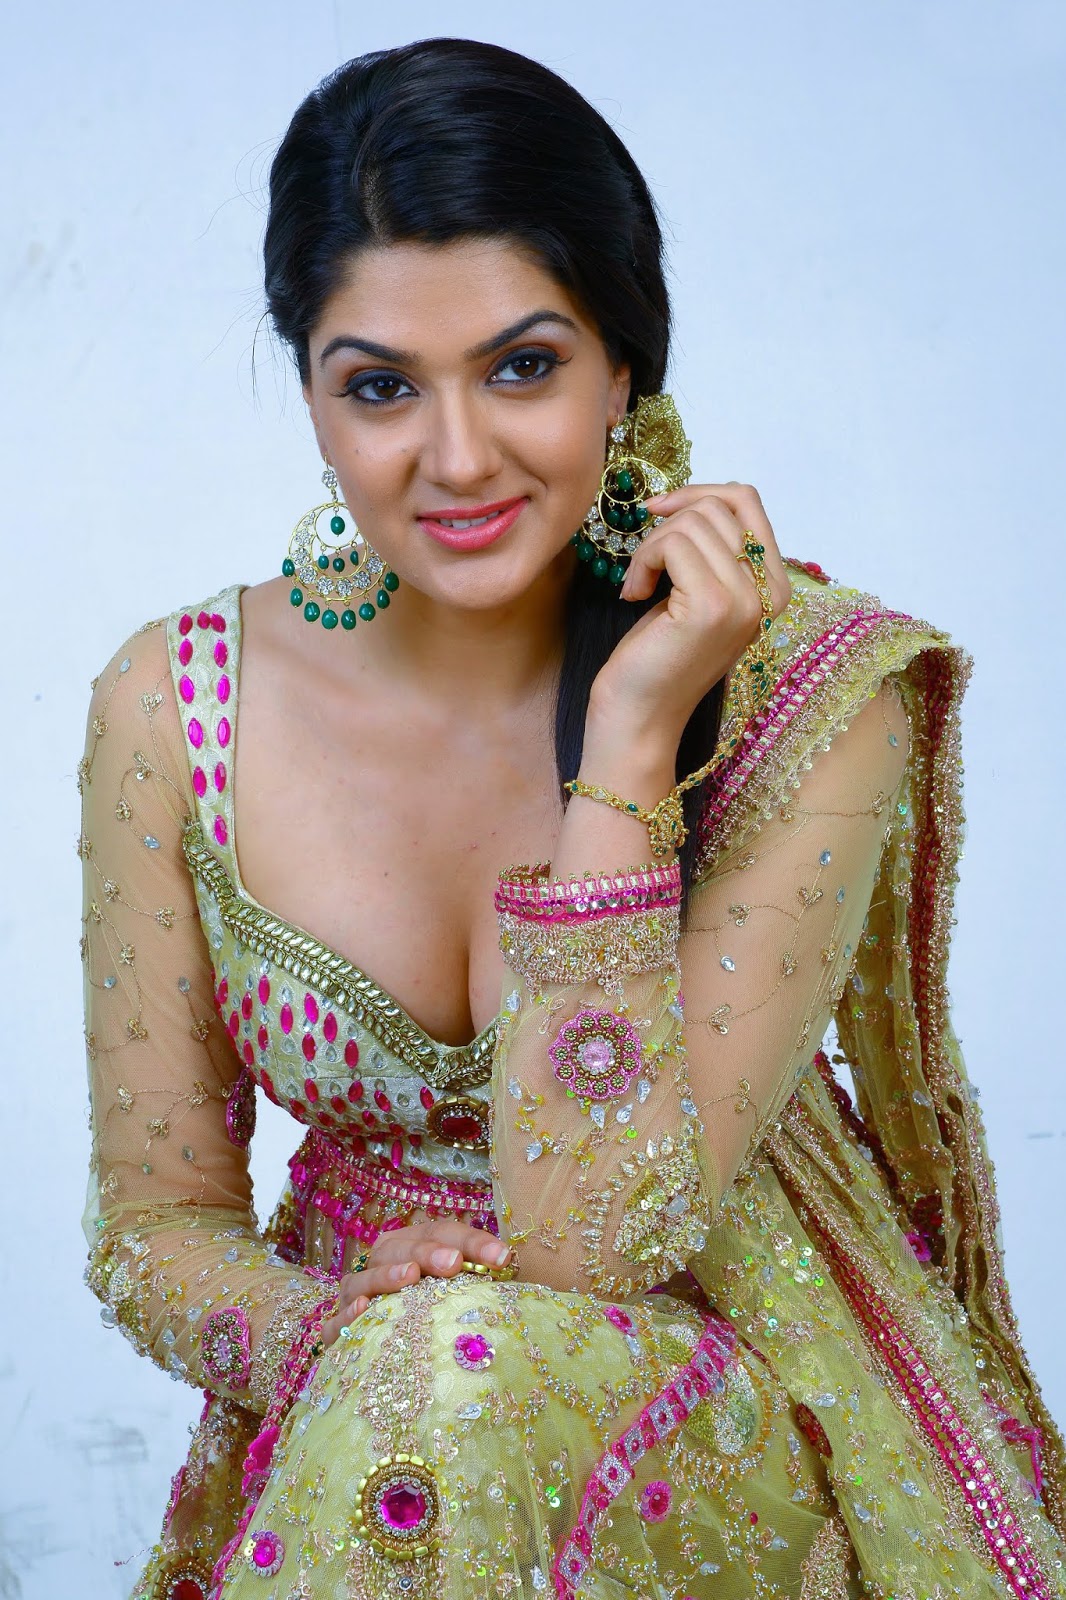 Beauty Galore Hd Sakshi Chaudhary Immensely Beautiful Photos